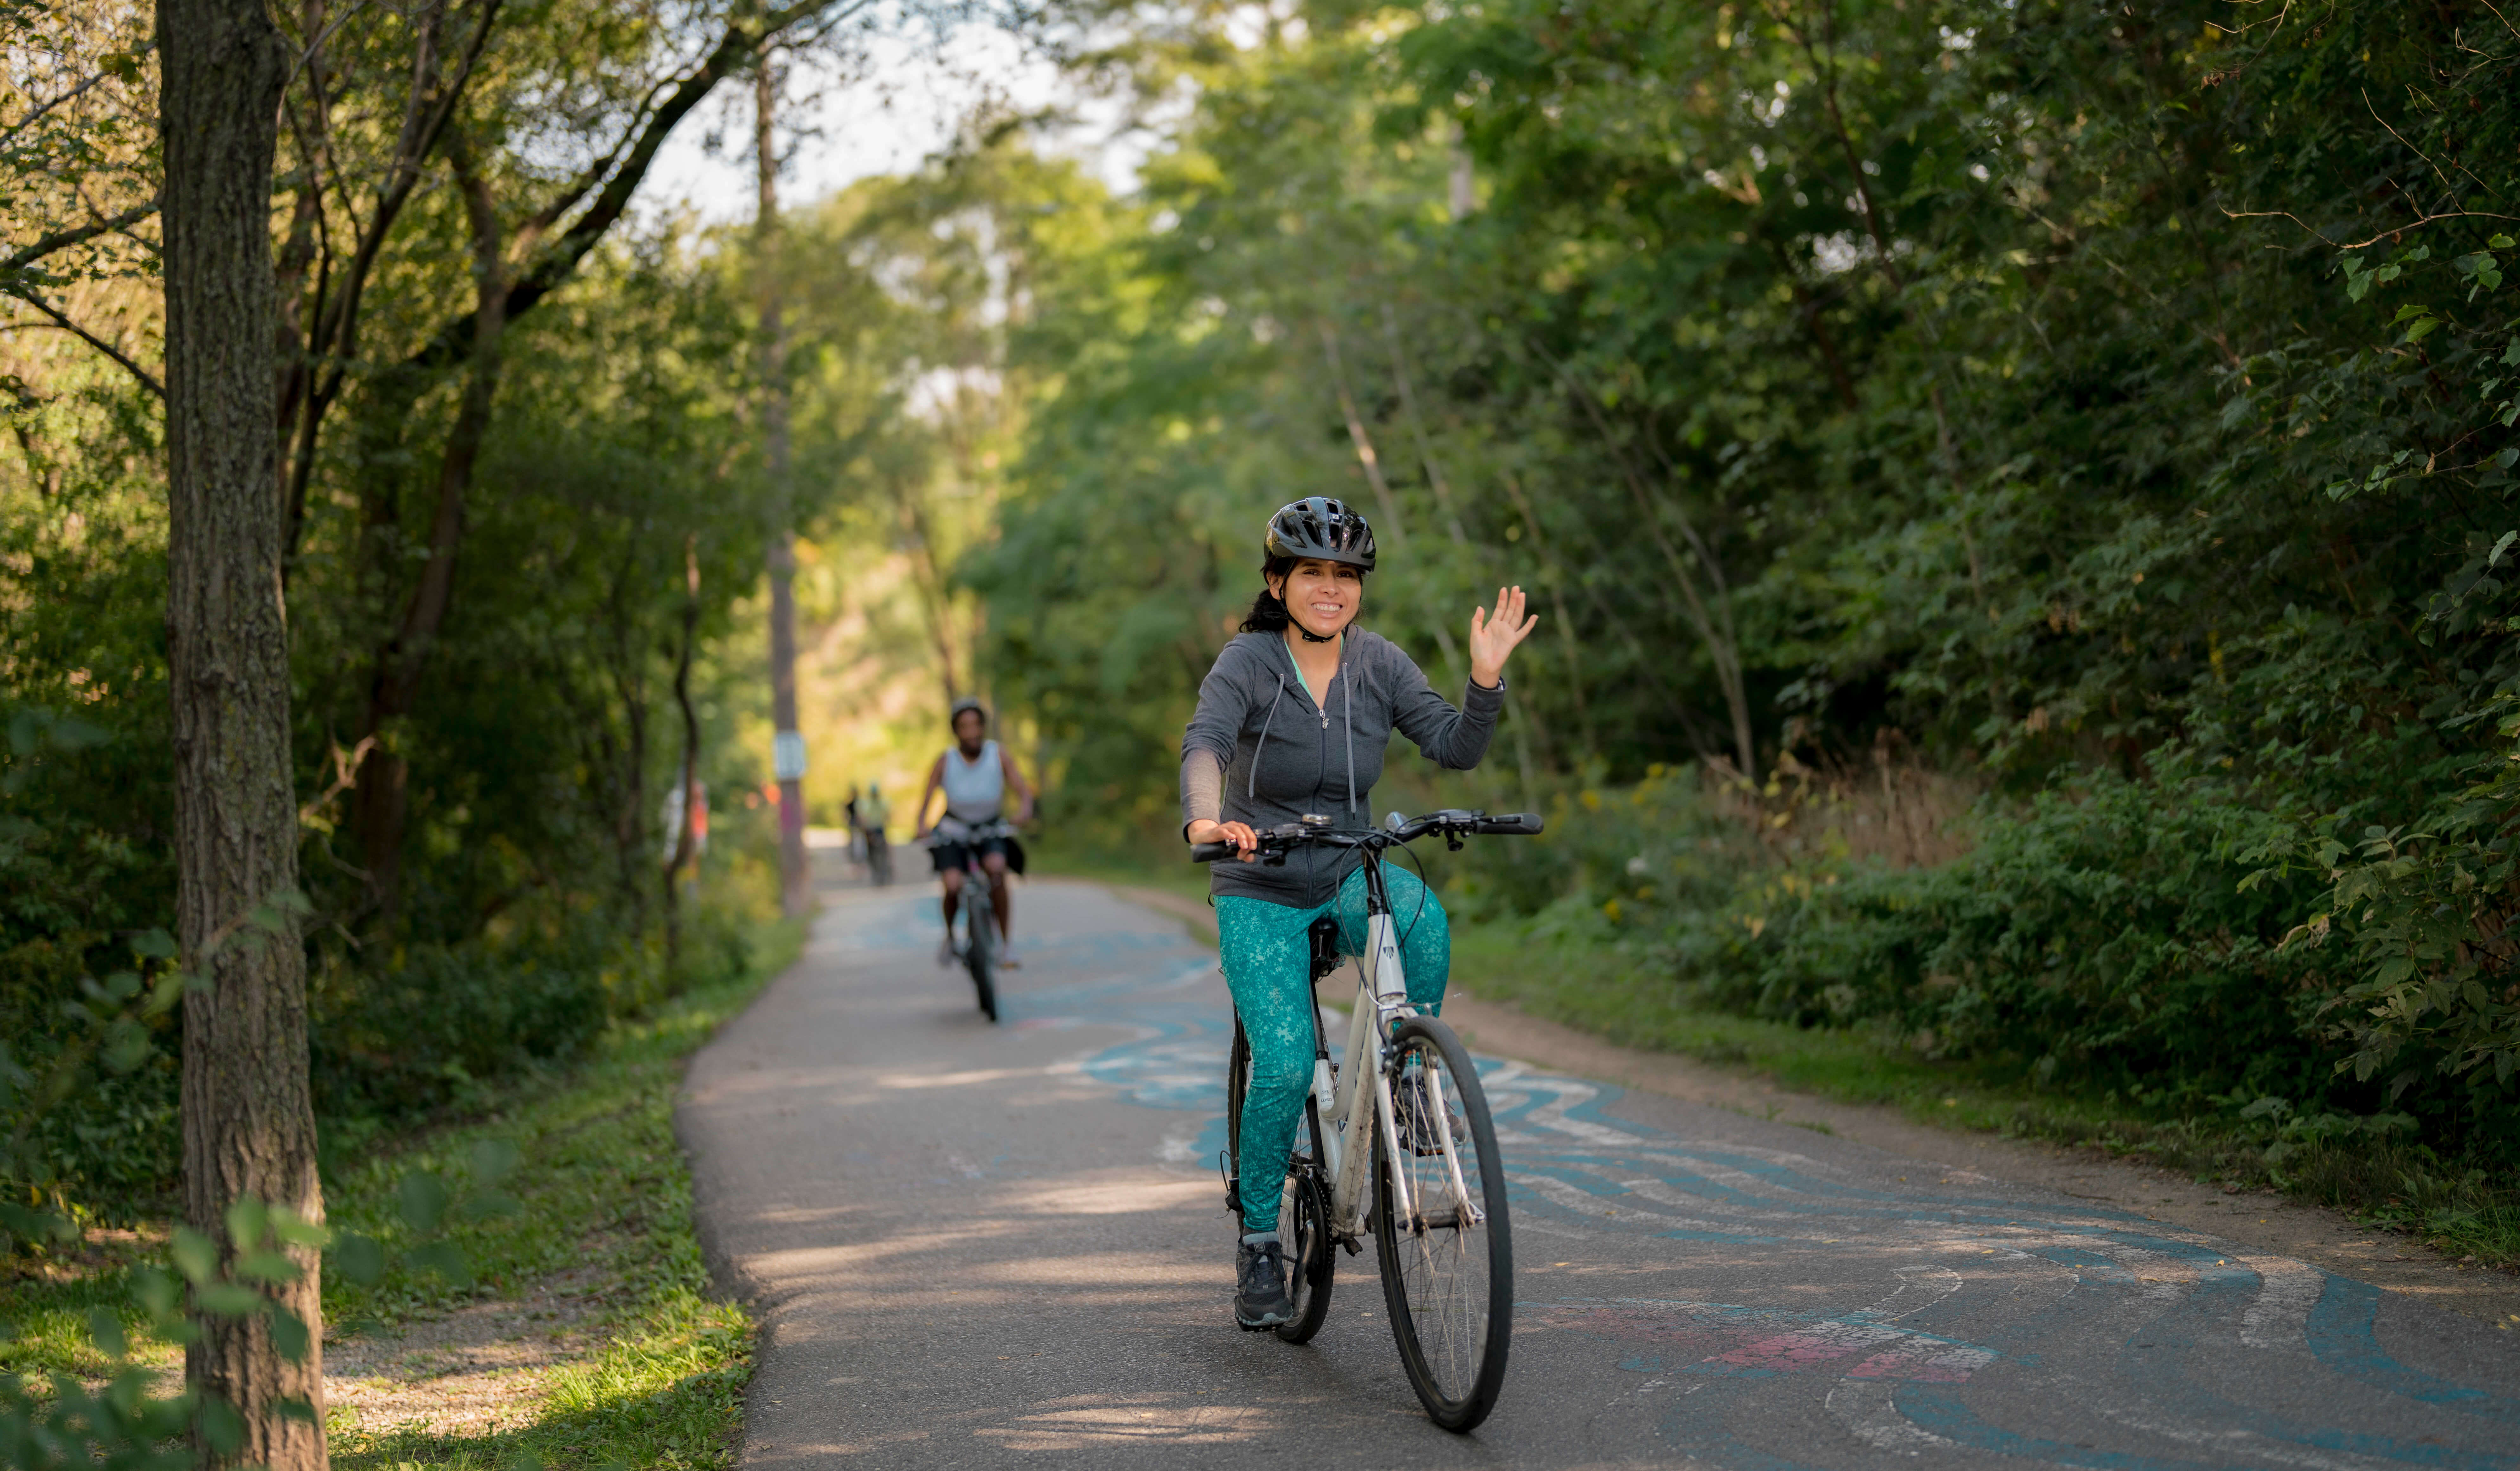 Cyclists ride by on ravine path